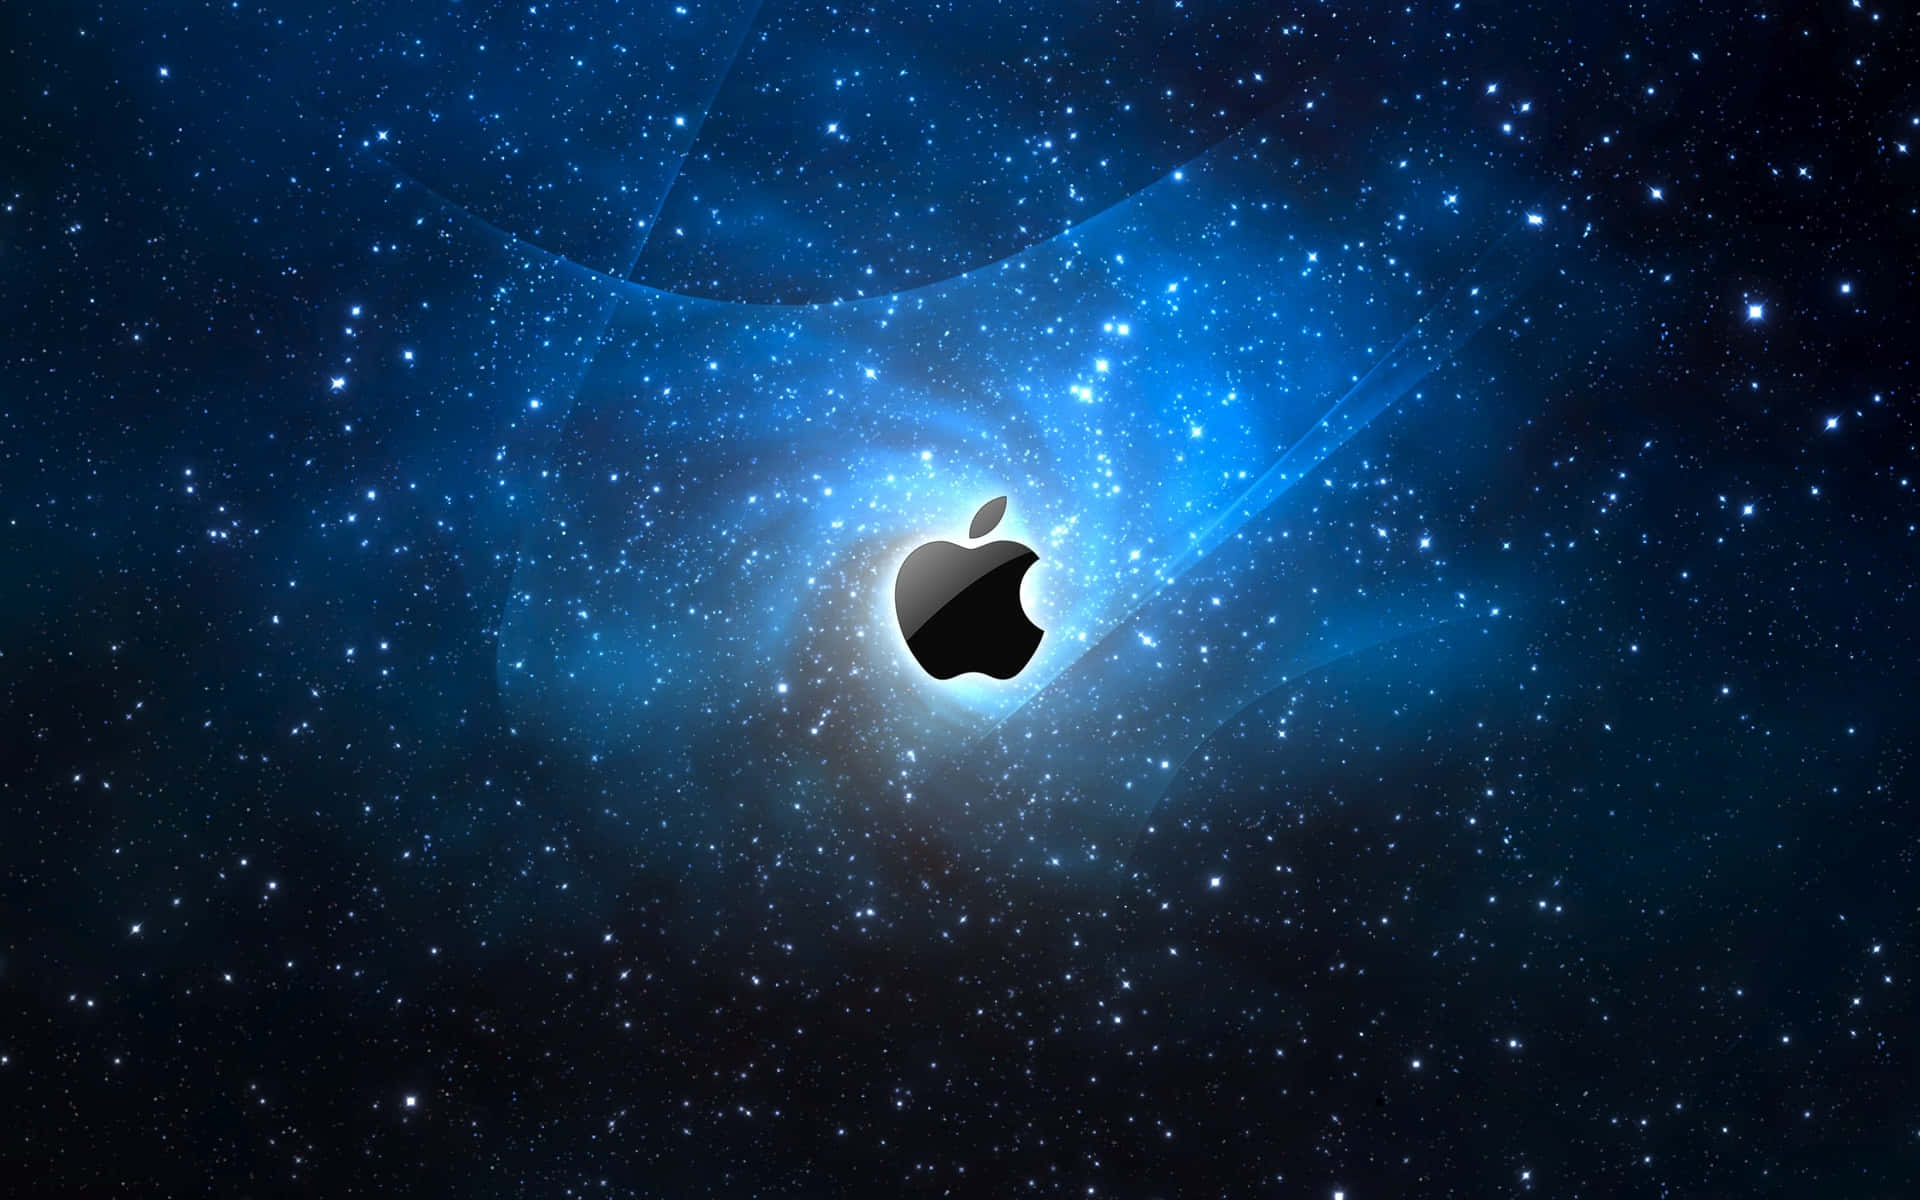 Apple Logo In The Space With Stars Background